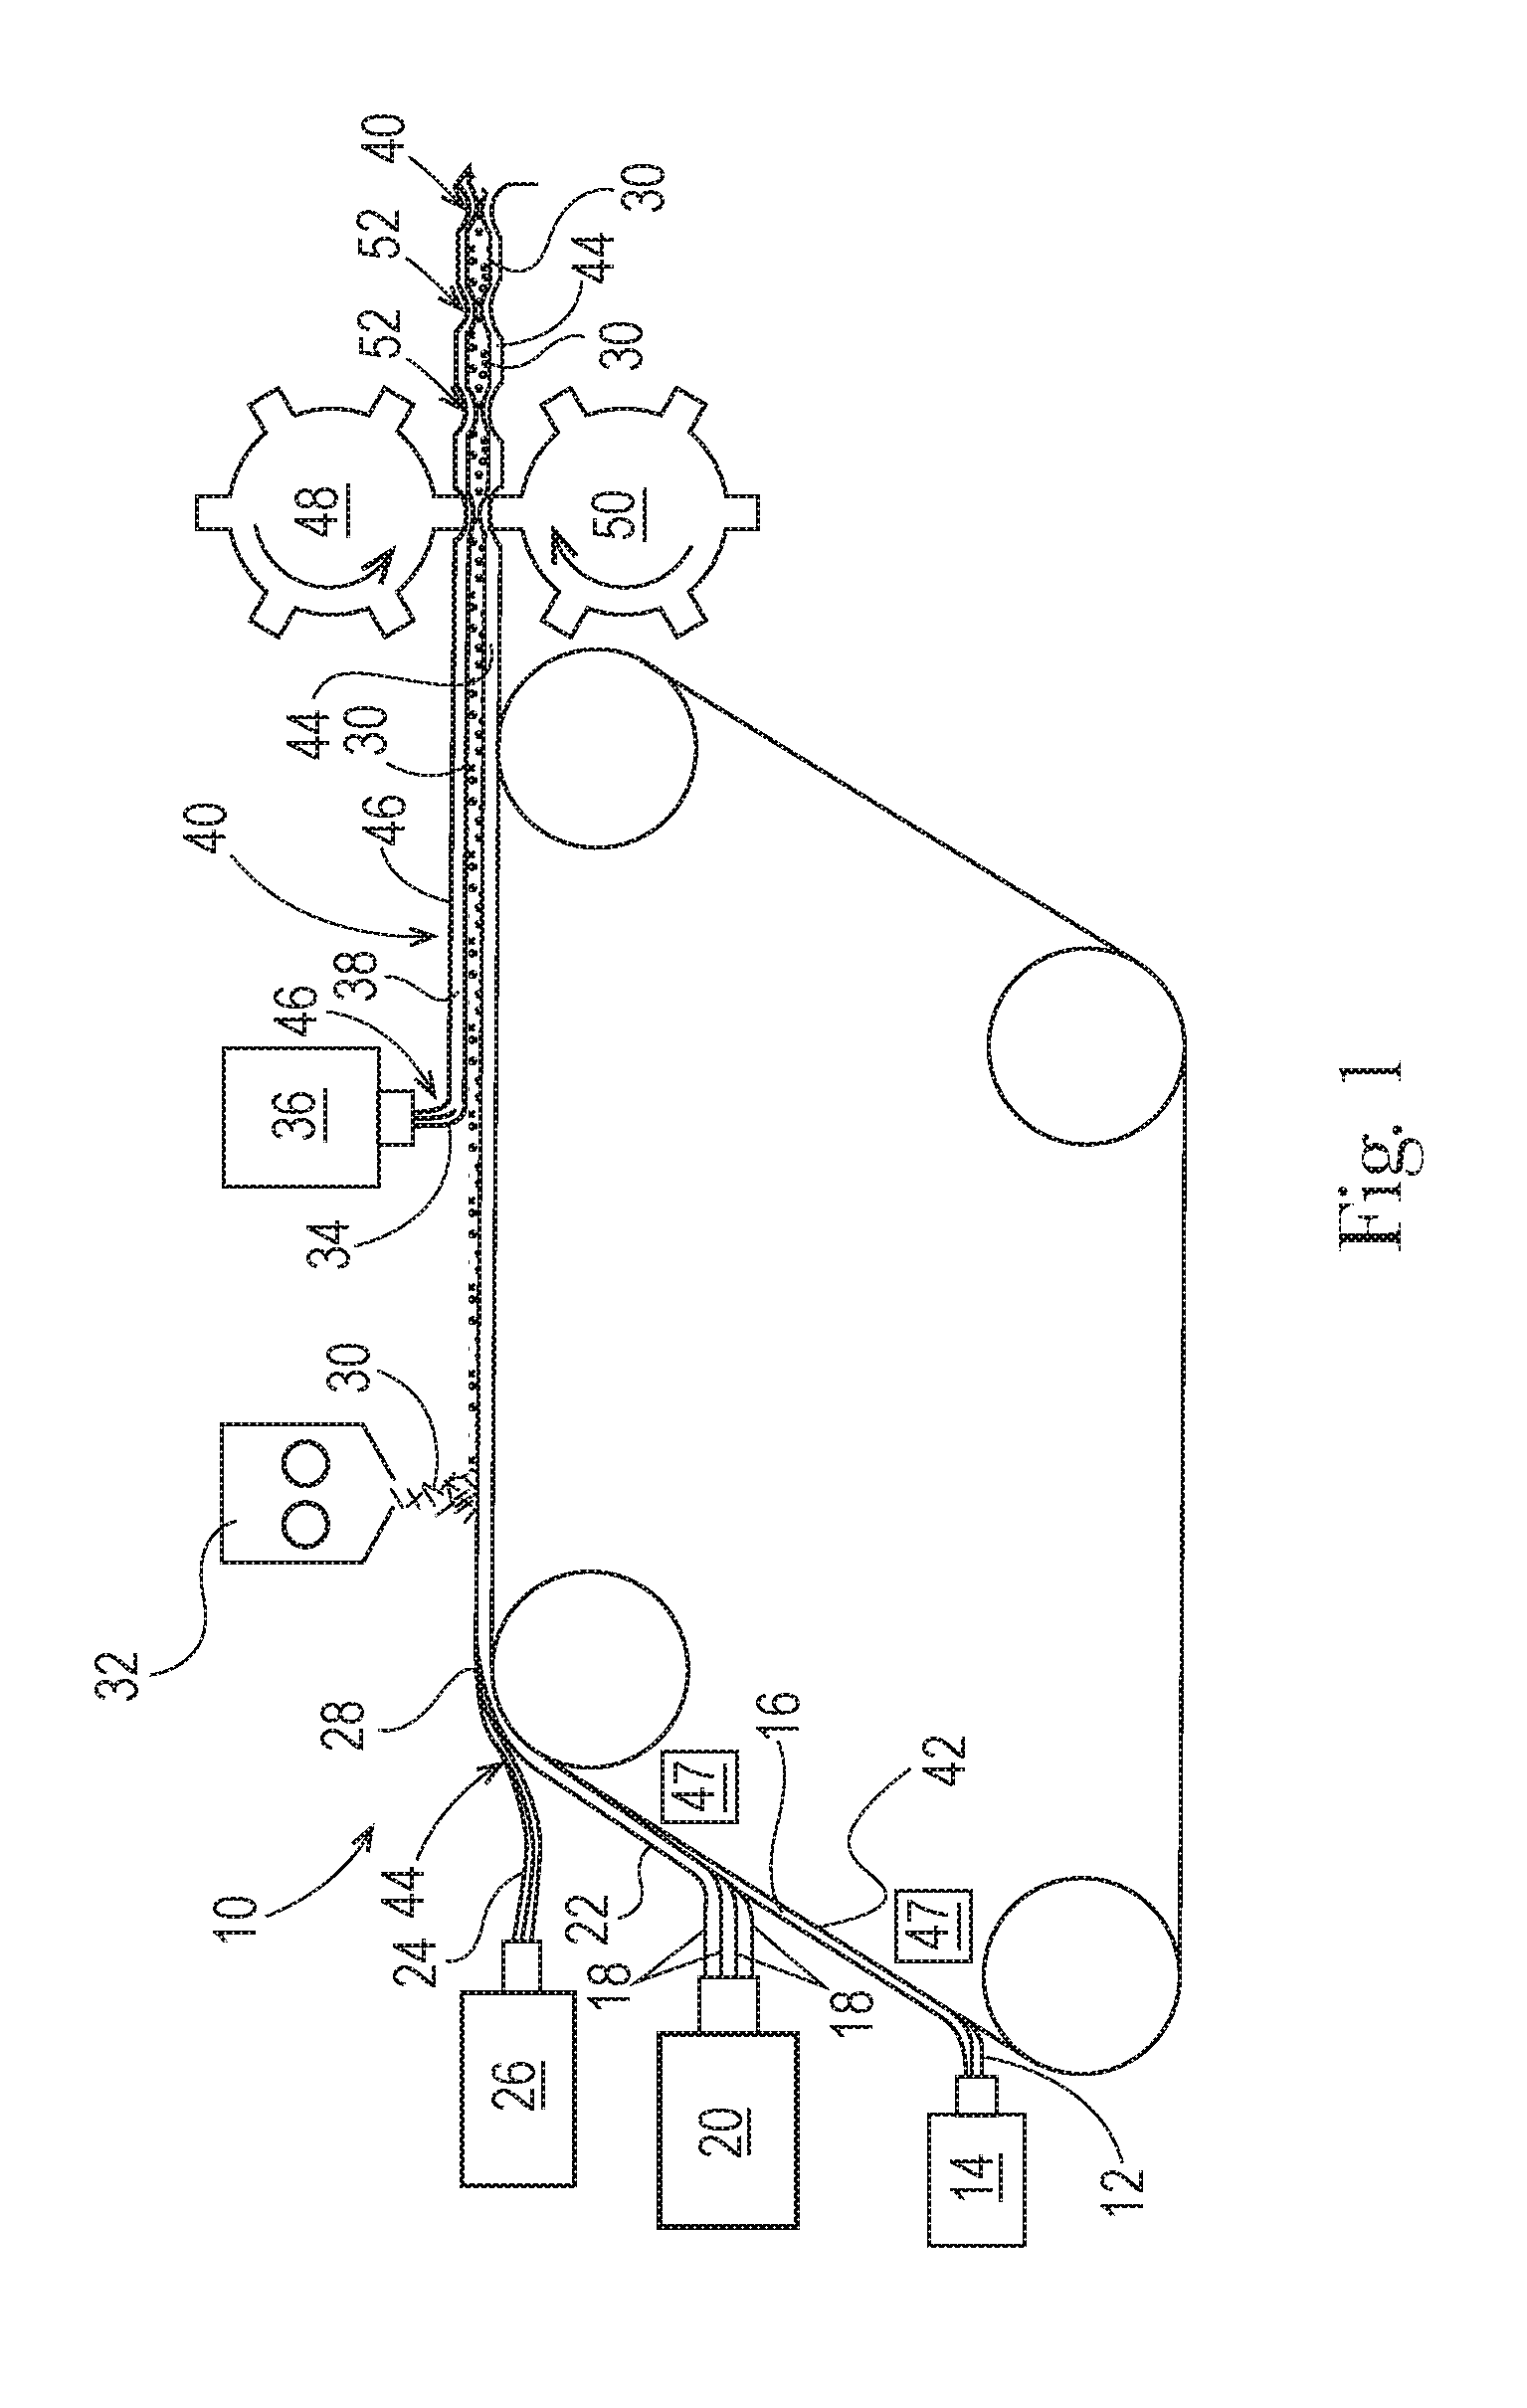 Fibrous Structures and Methods for Making Same